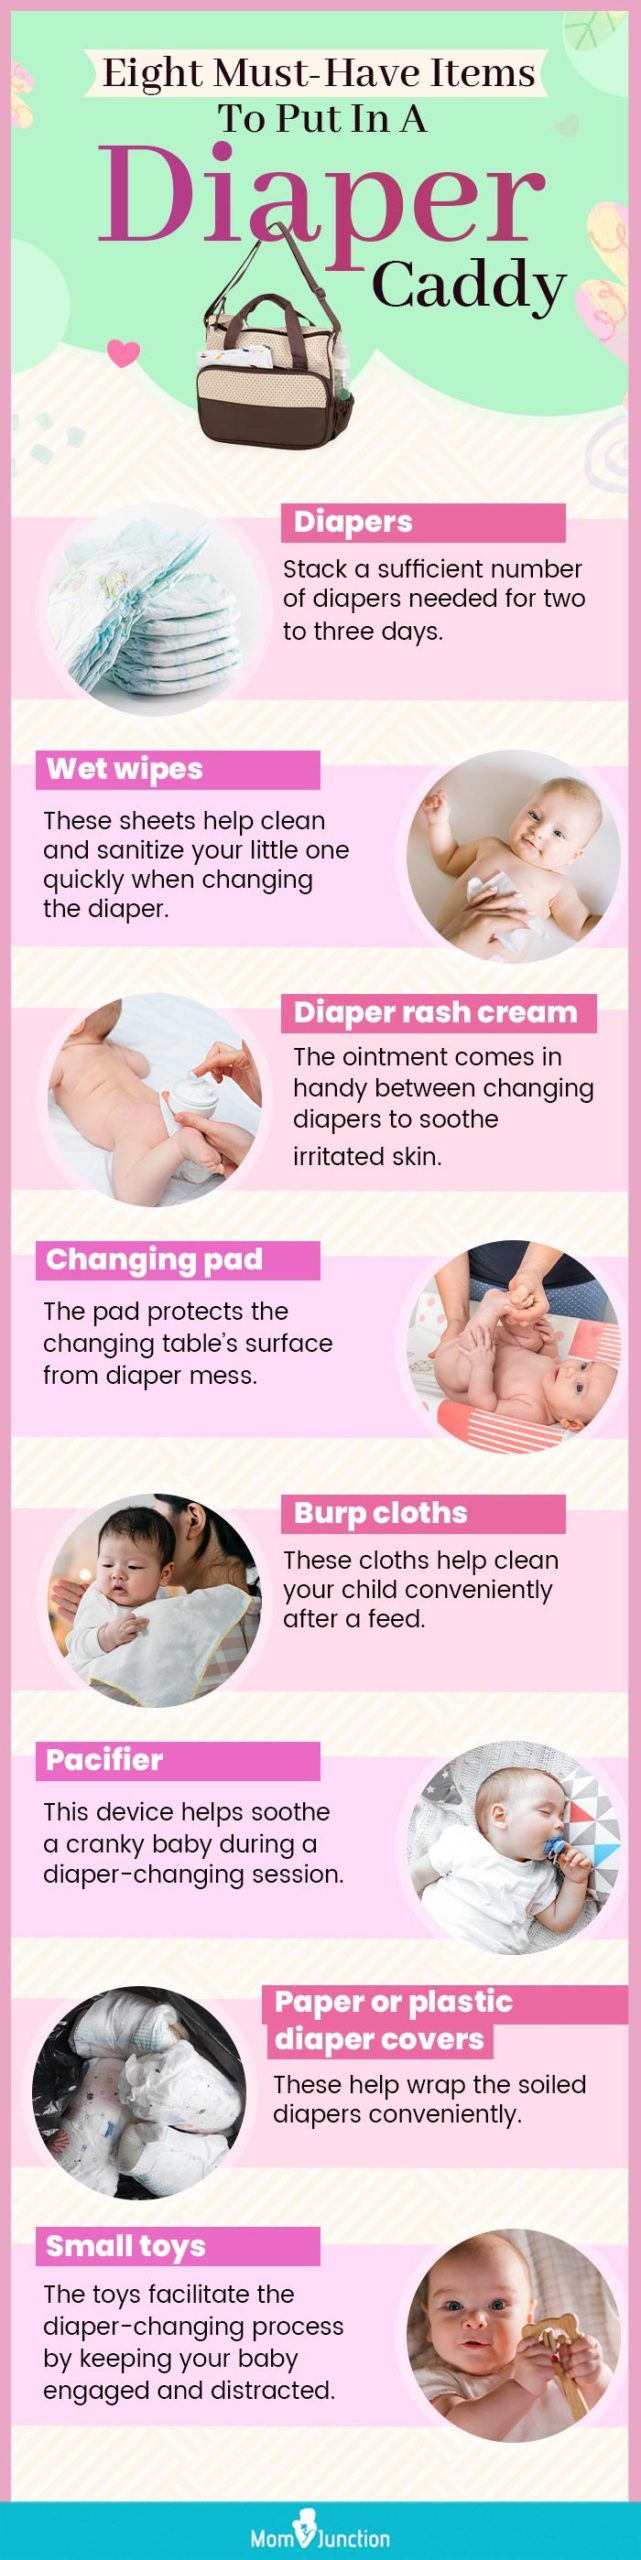 Eight-Must-Have-Items-To-Put-In-A-Diaper-Caddy (infographic)